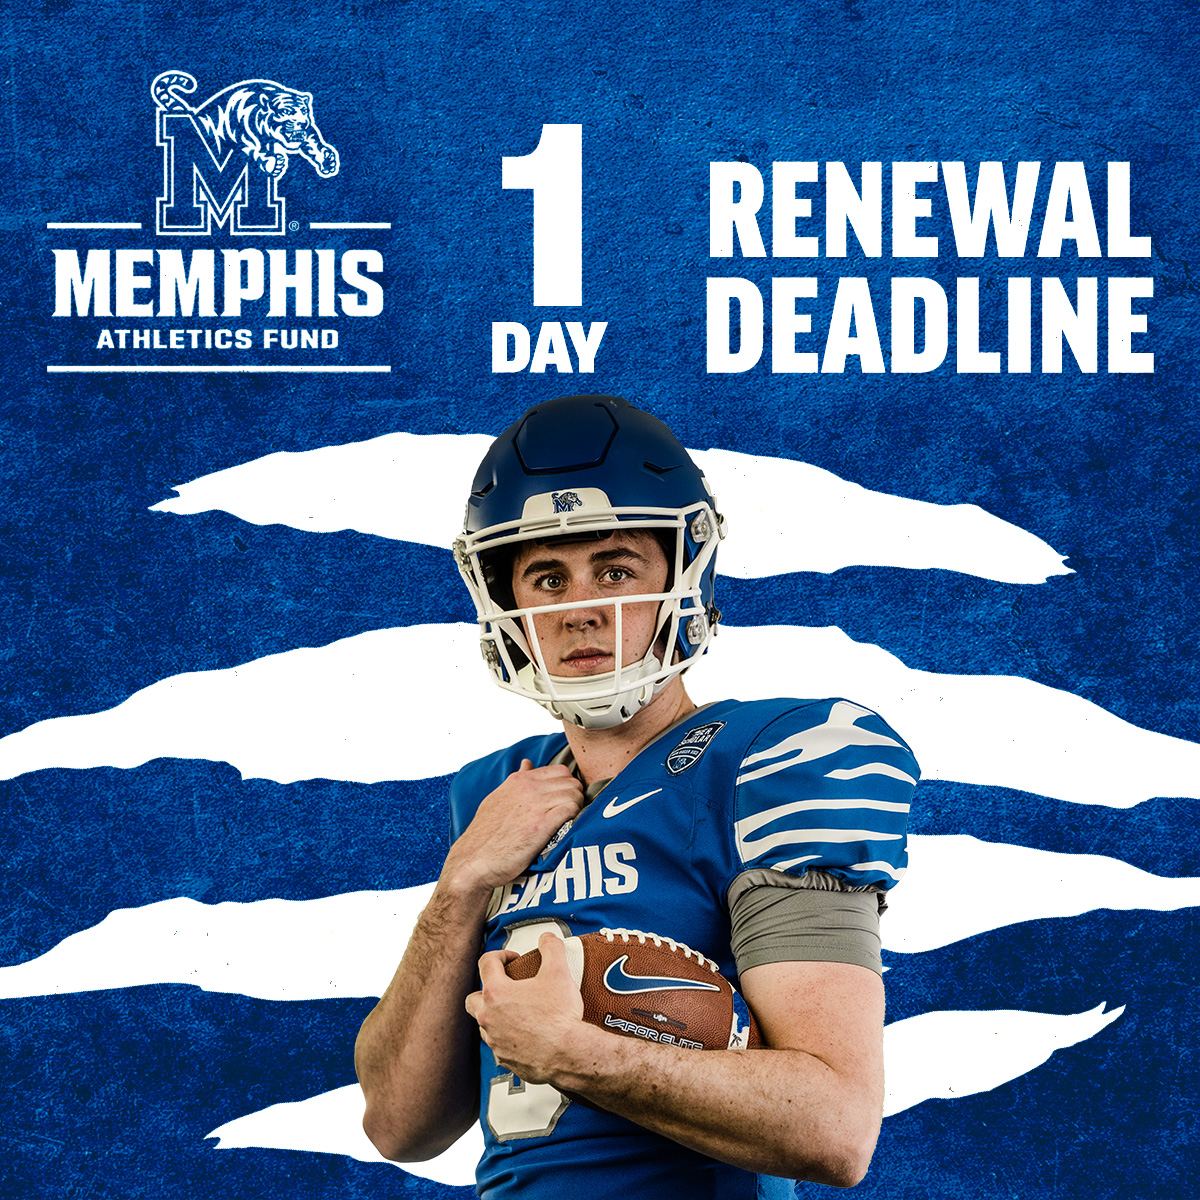 ONE MORE DAY! Renew your Memphis Athletics Fund contributions and season tickets today to see your Memphis Tigers during the 2024-25 season!
There is still time to renew and enter to win the grand prize 📷
Go to GoTigersGo.com or call 901-678-2334 today!